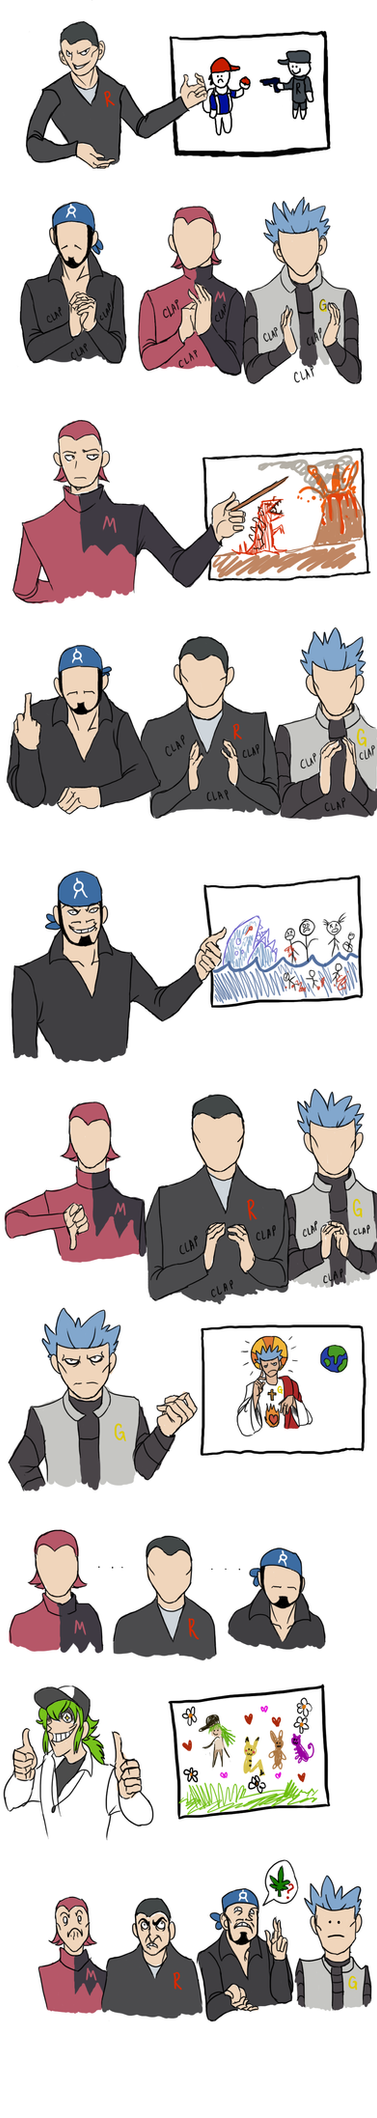 pokeplans_by_in_the_machine-d30zn3i.png